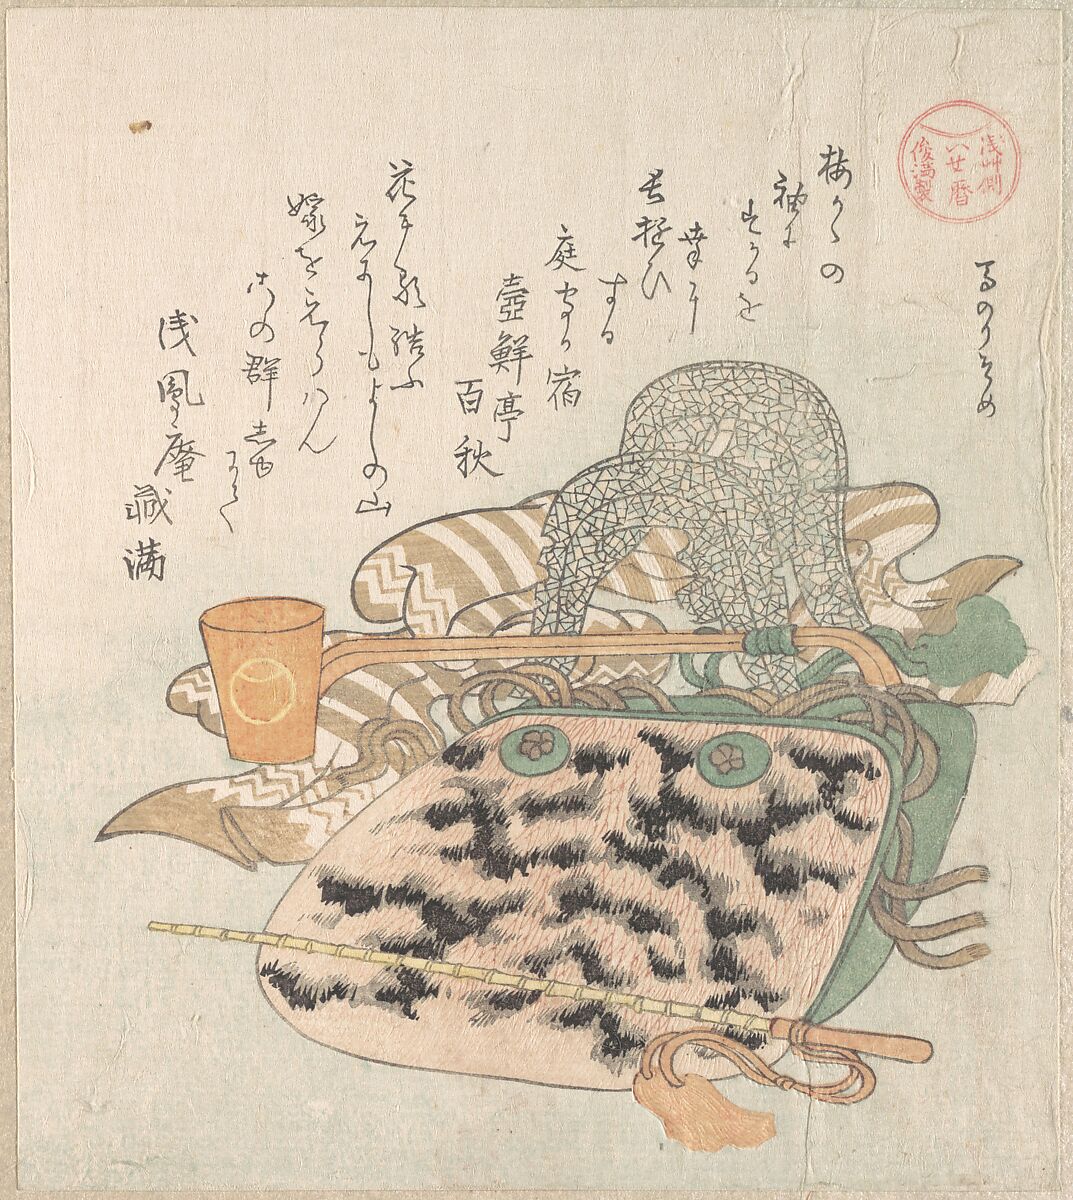 Saddle, Horse-Dipper and Other Harness, Kubo Shunman (Japanese, 1757–1820) (?), Woodblock print (surimono); ink and color on paper, Japan 